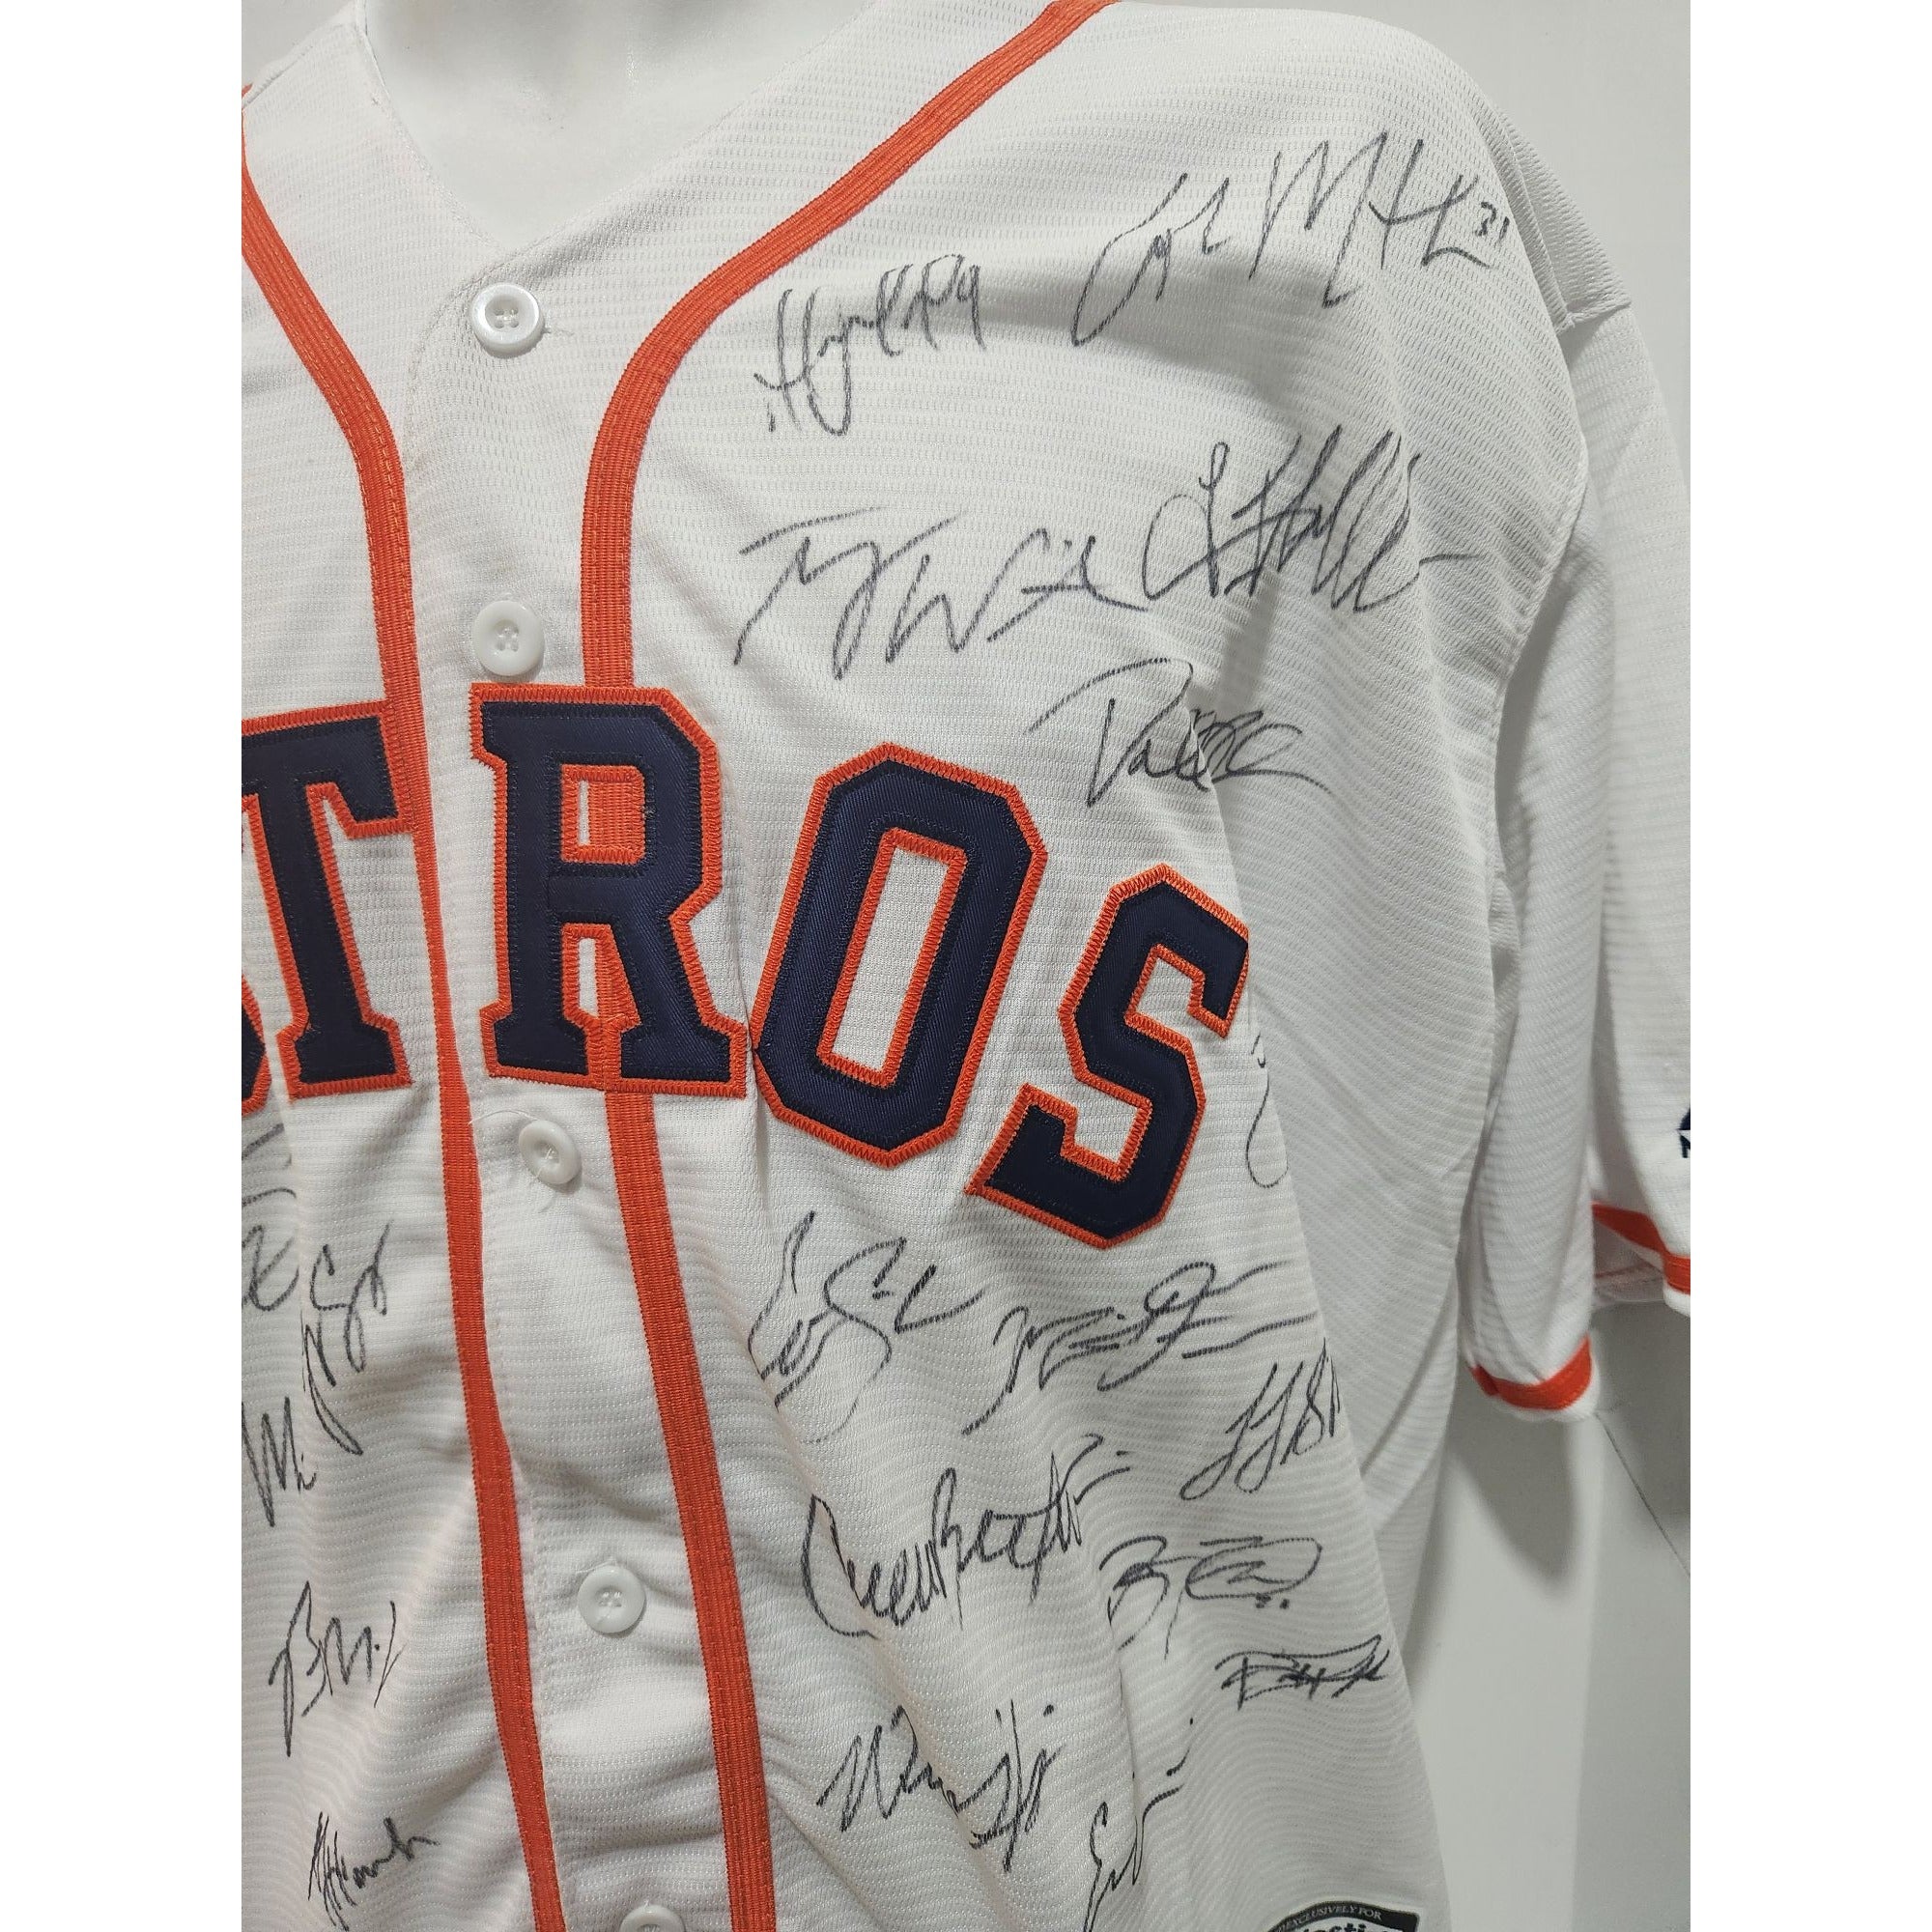 Awesome Artifacts Jose Altuve George Springer Justin Verlander Dallas Keuchel Houston Astros 2017 World Series Champions Team Signed Jersey by Awesome Artifact